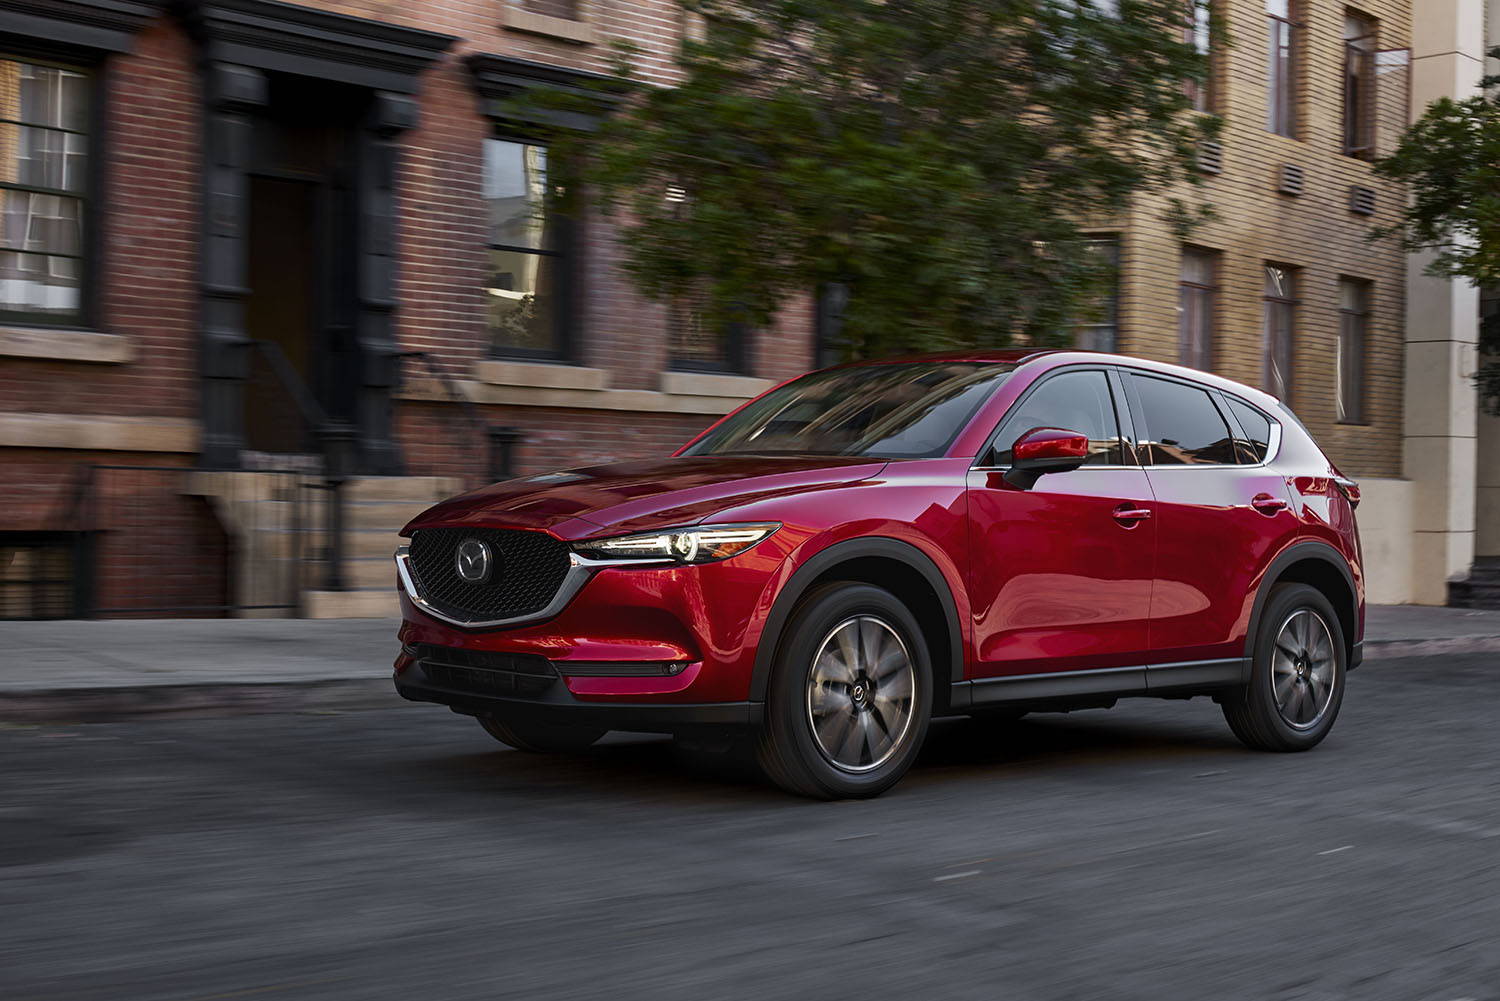 Mazda CX-5 in Soul Red Crystal paint